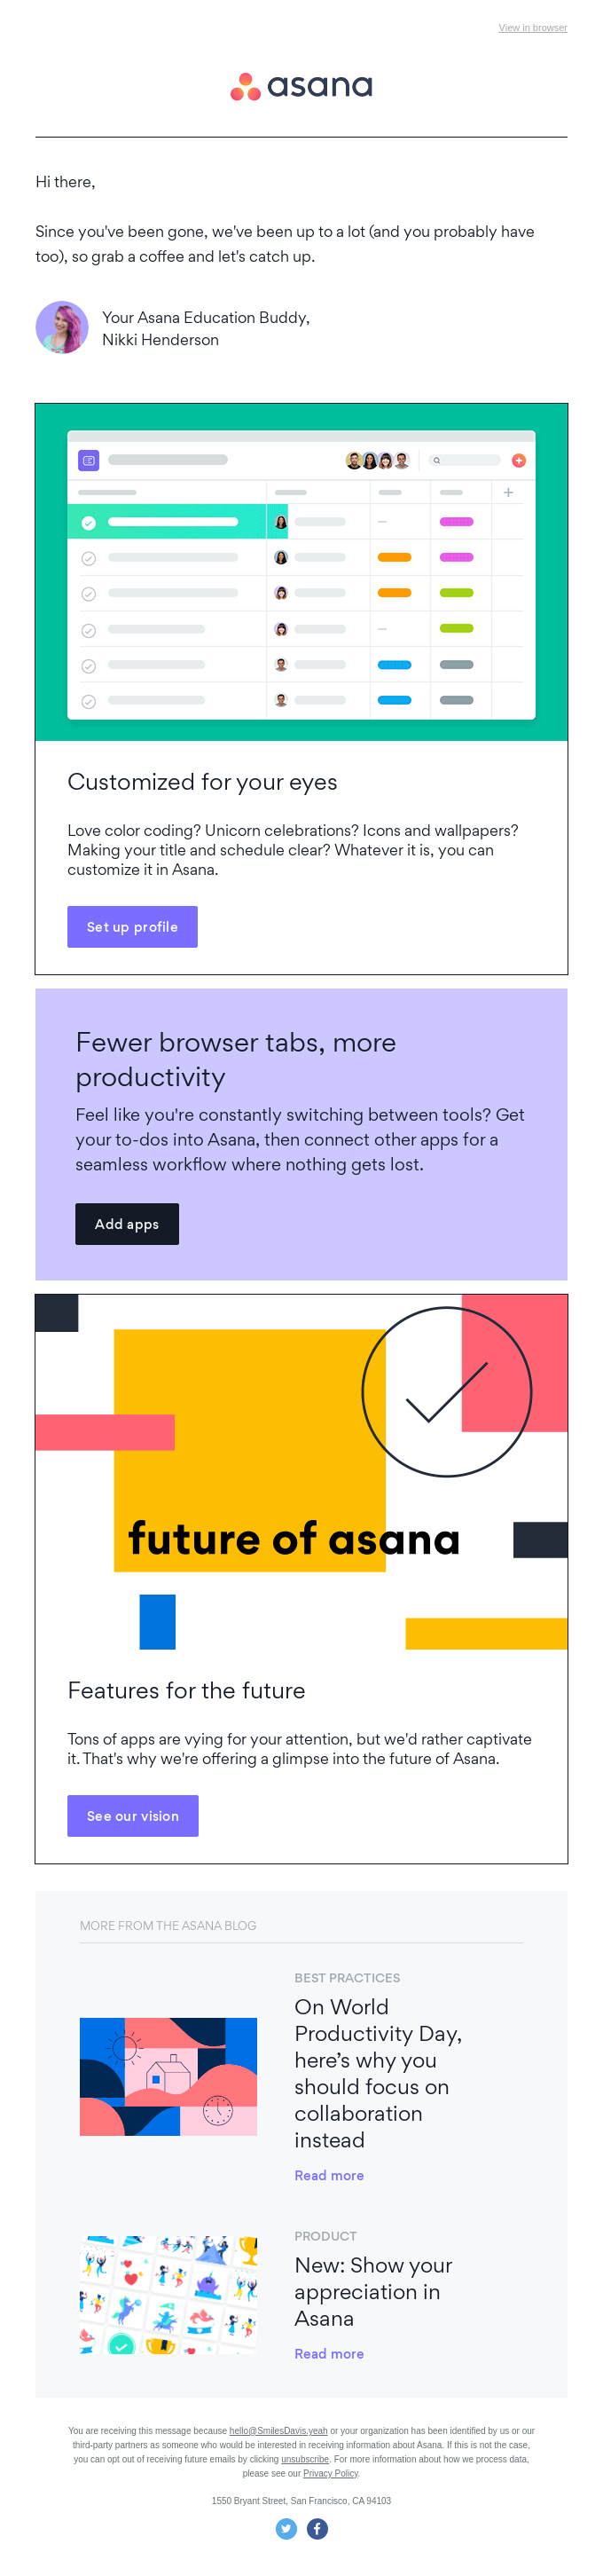 You're missing out on unicorns - Asana Email Newsletter